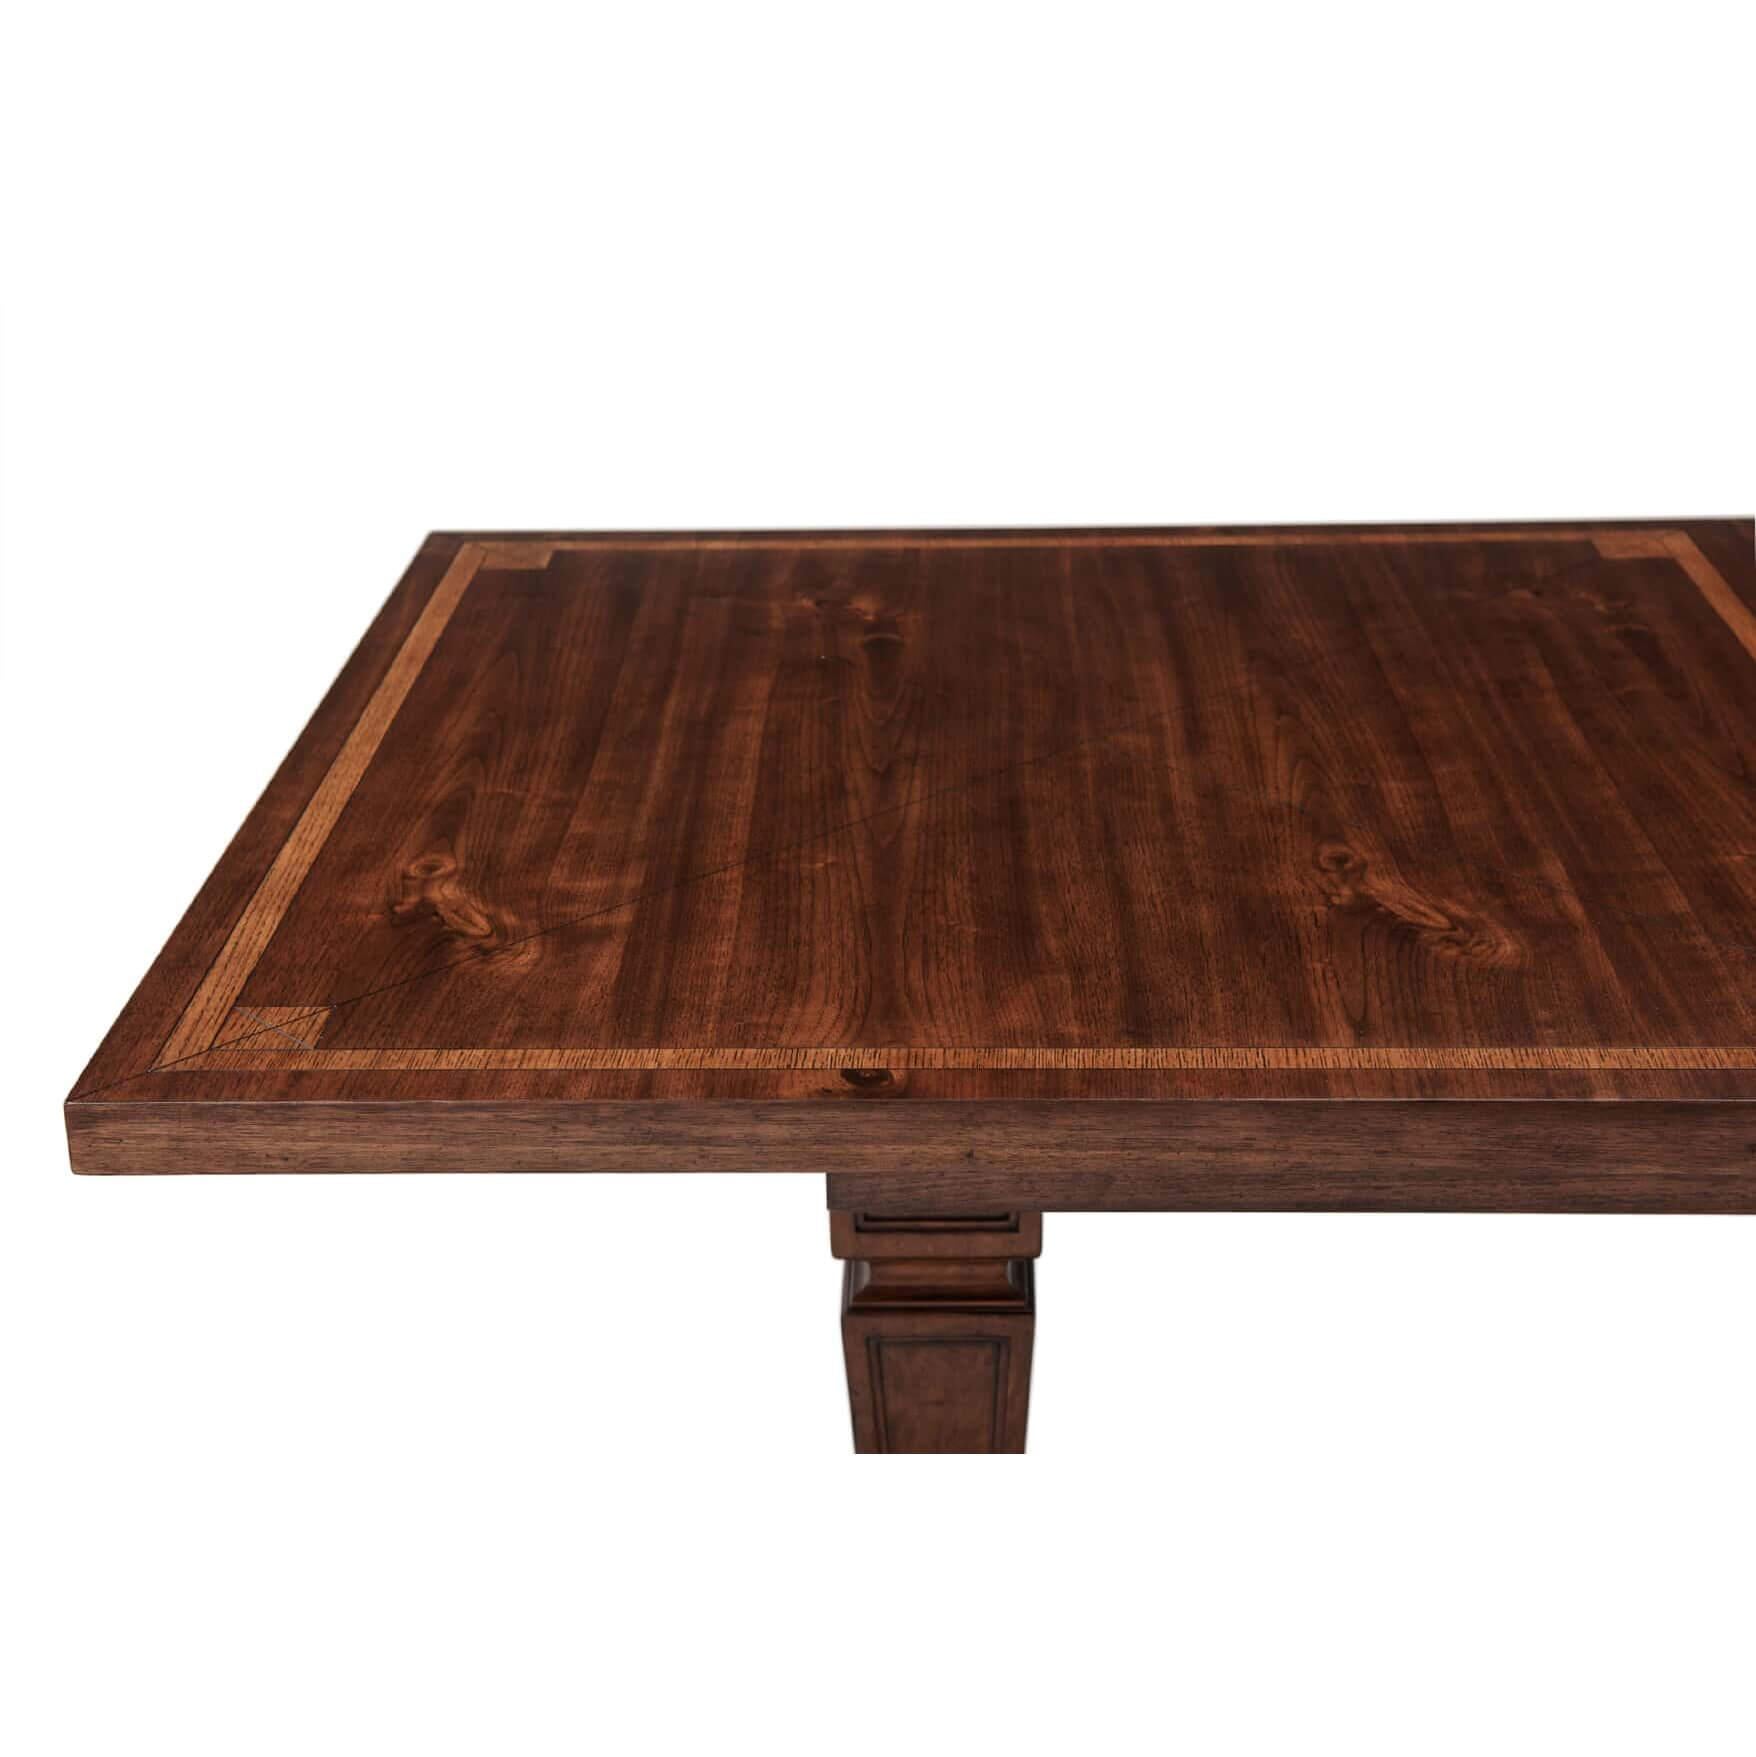 Contemporary Provincial Neoclassic Extension Dining Table For Sale